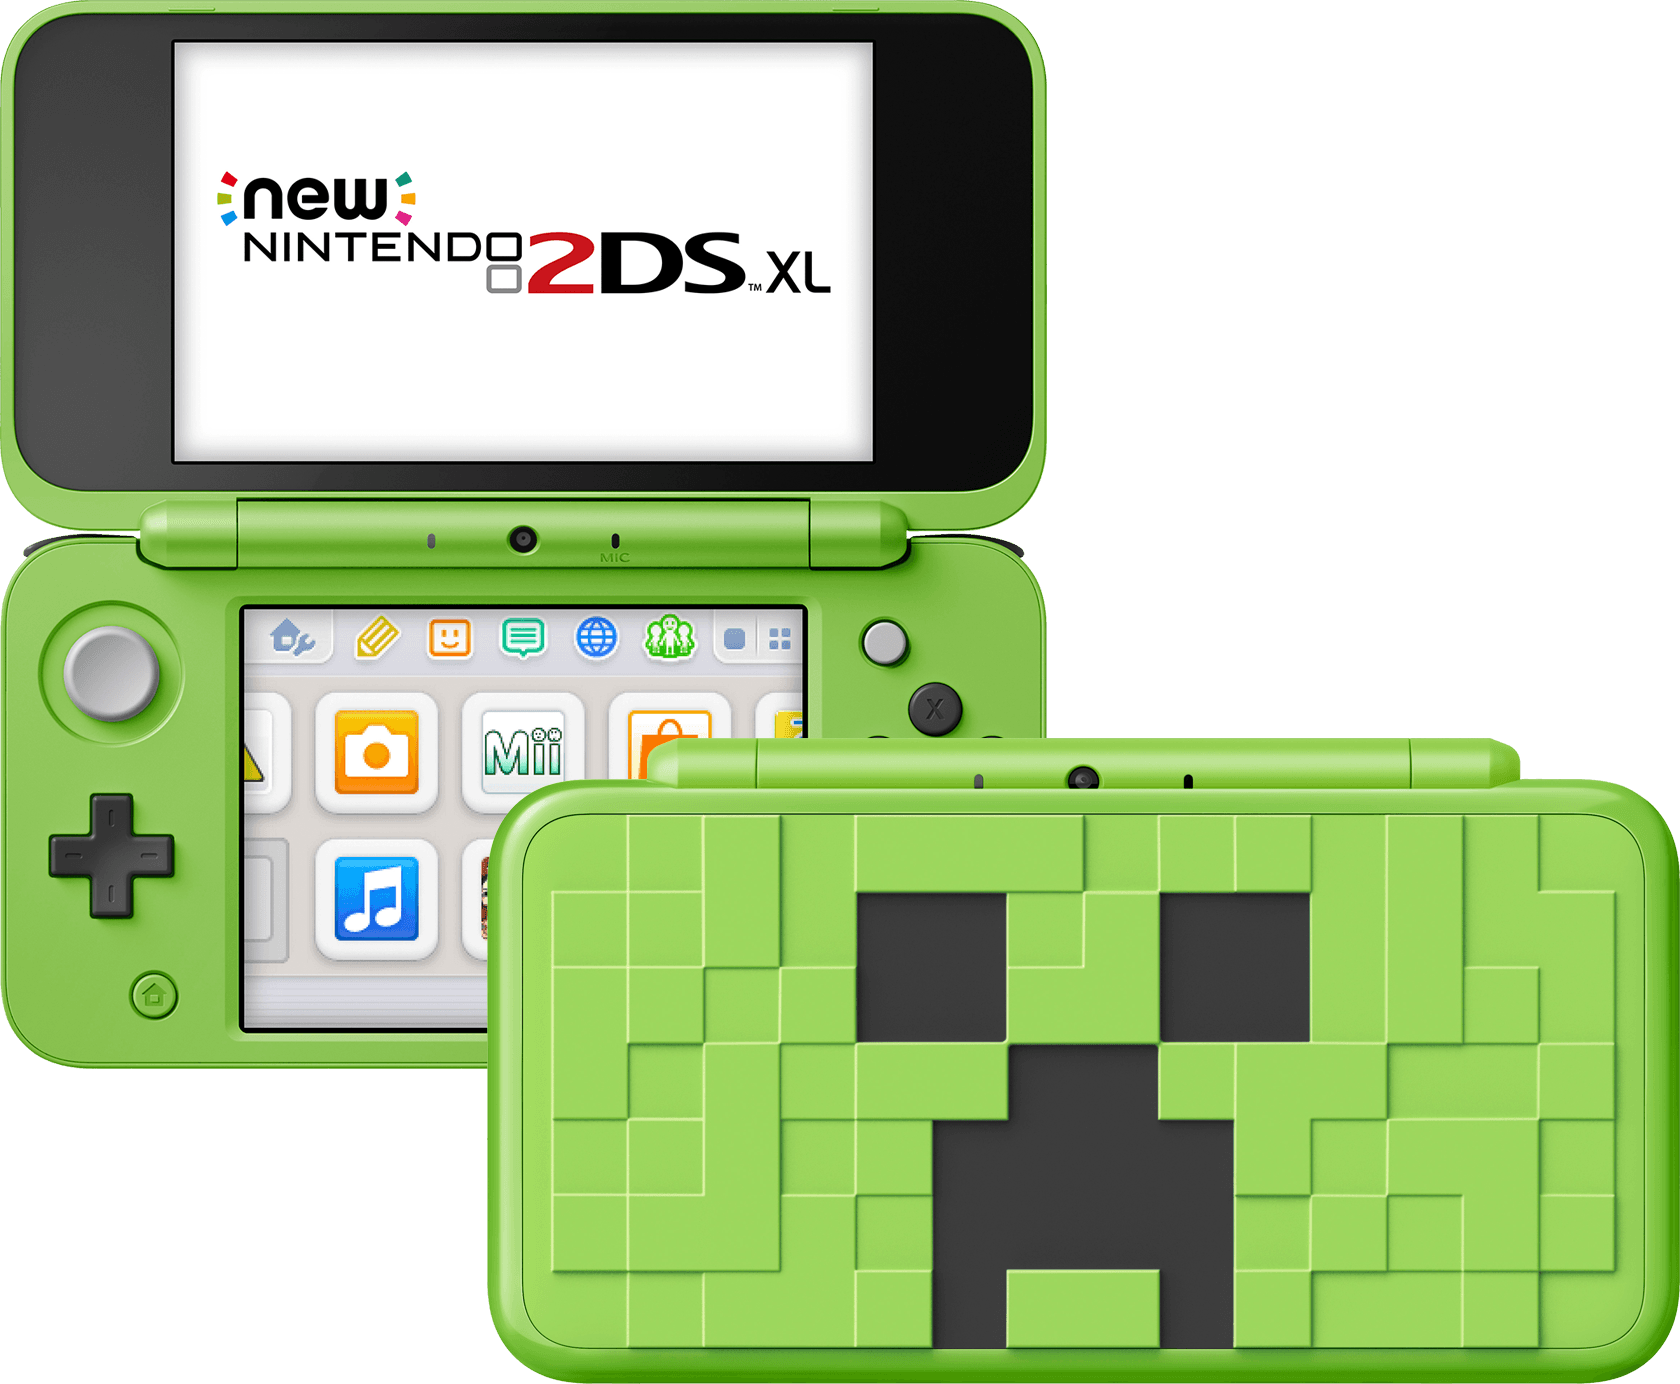 New 2ds xl. Nintendo 2ds XL. New Nintendo 2ds. Nintendo 2ds Limited.